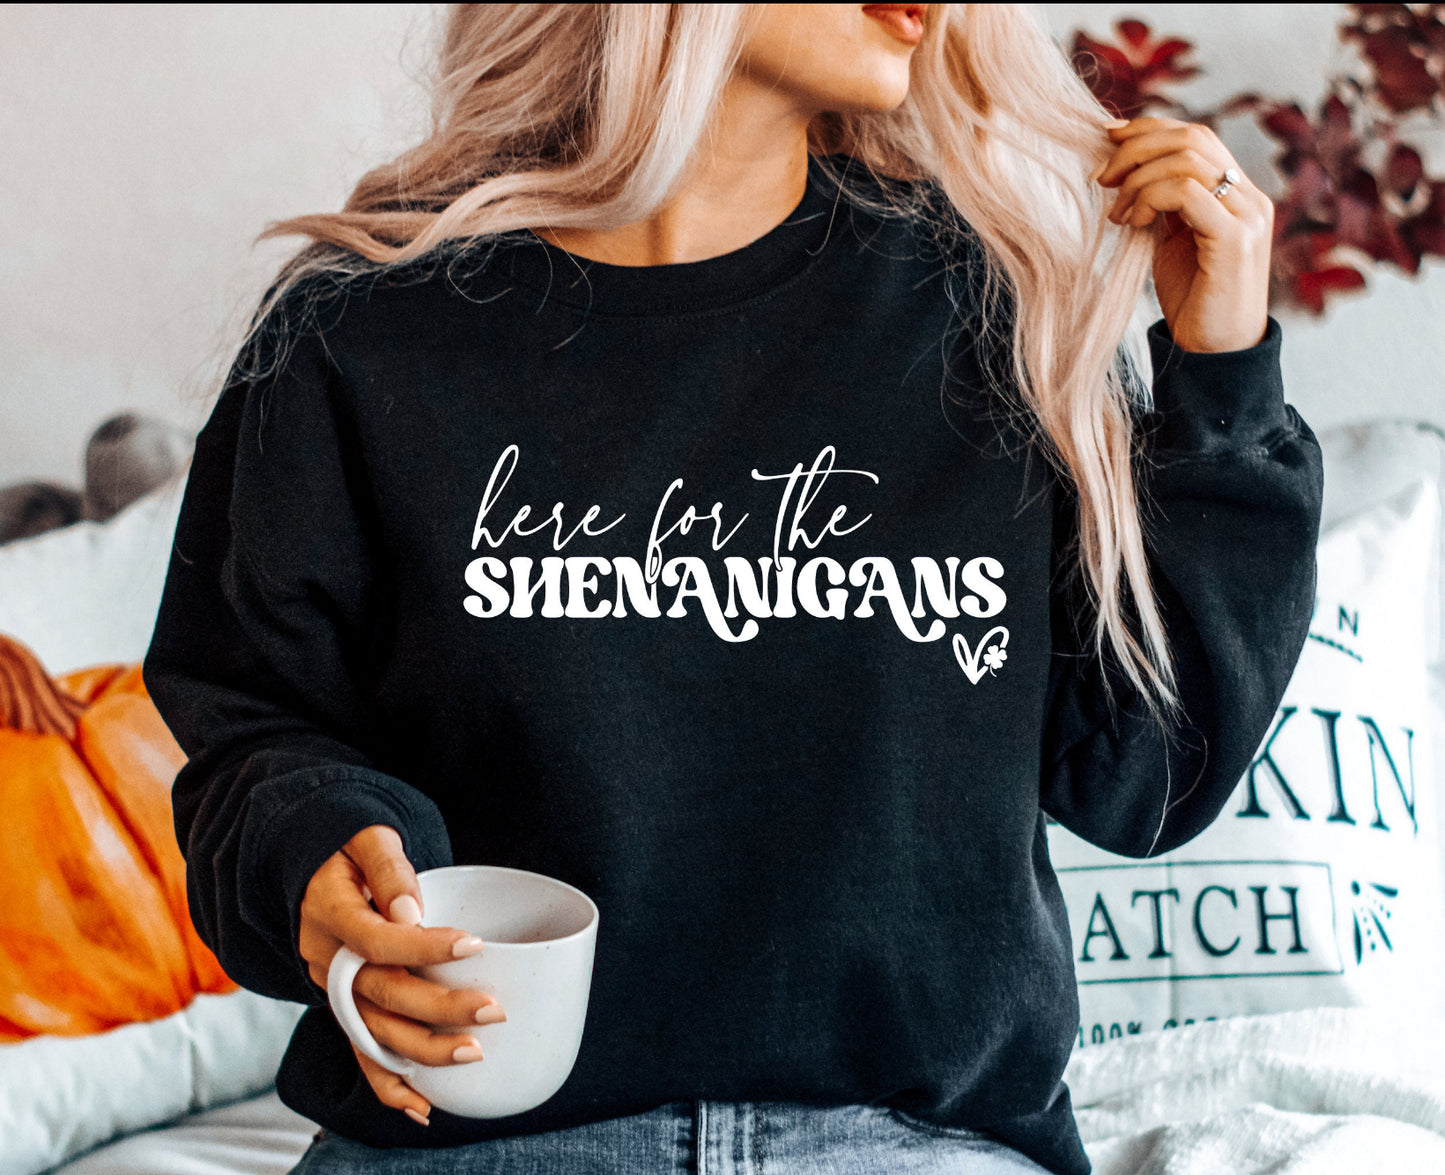 Here for the Shenanigans Top